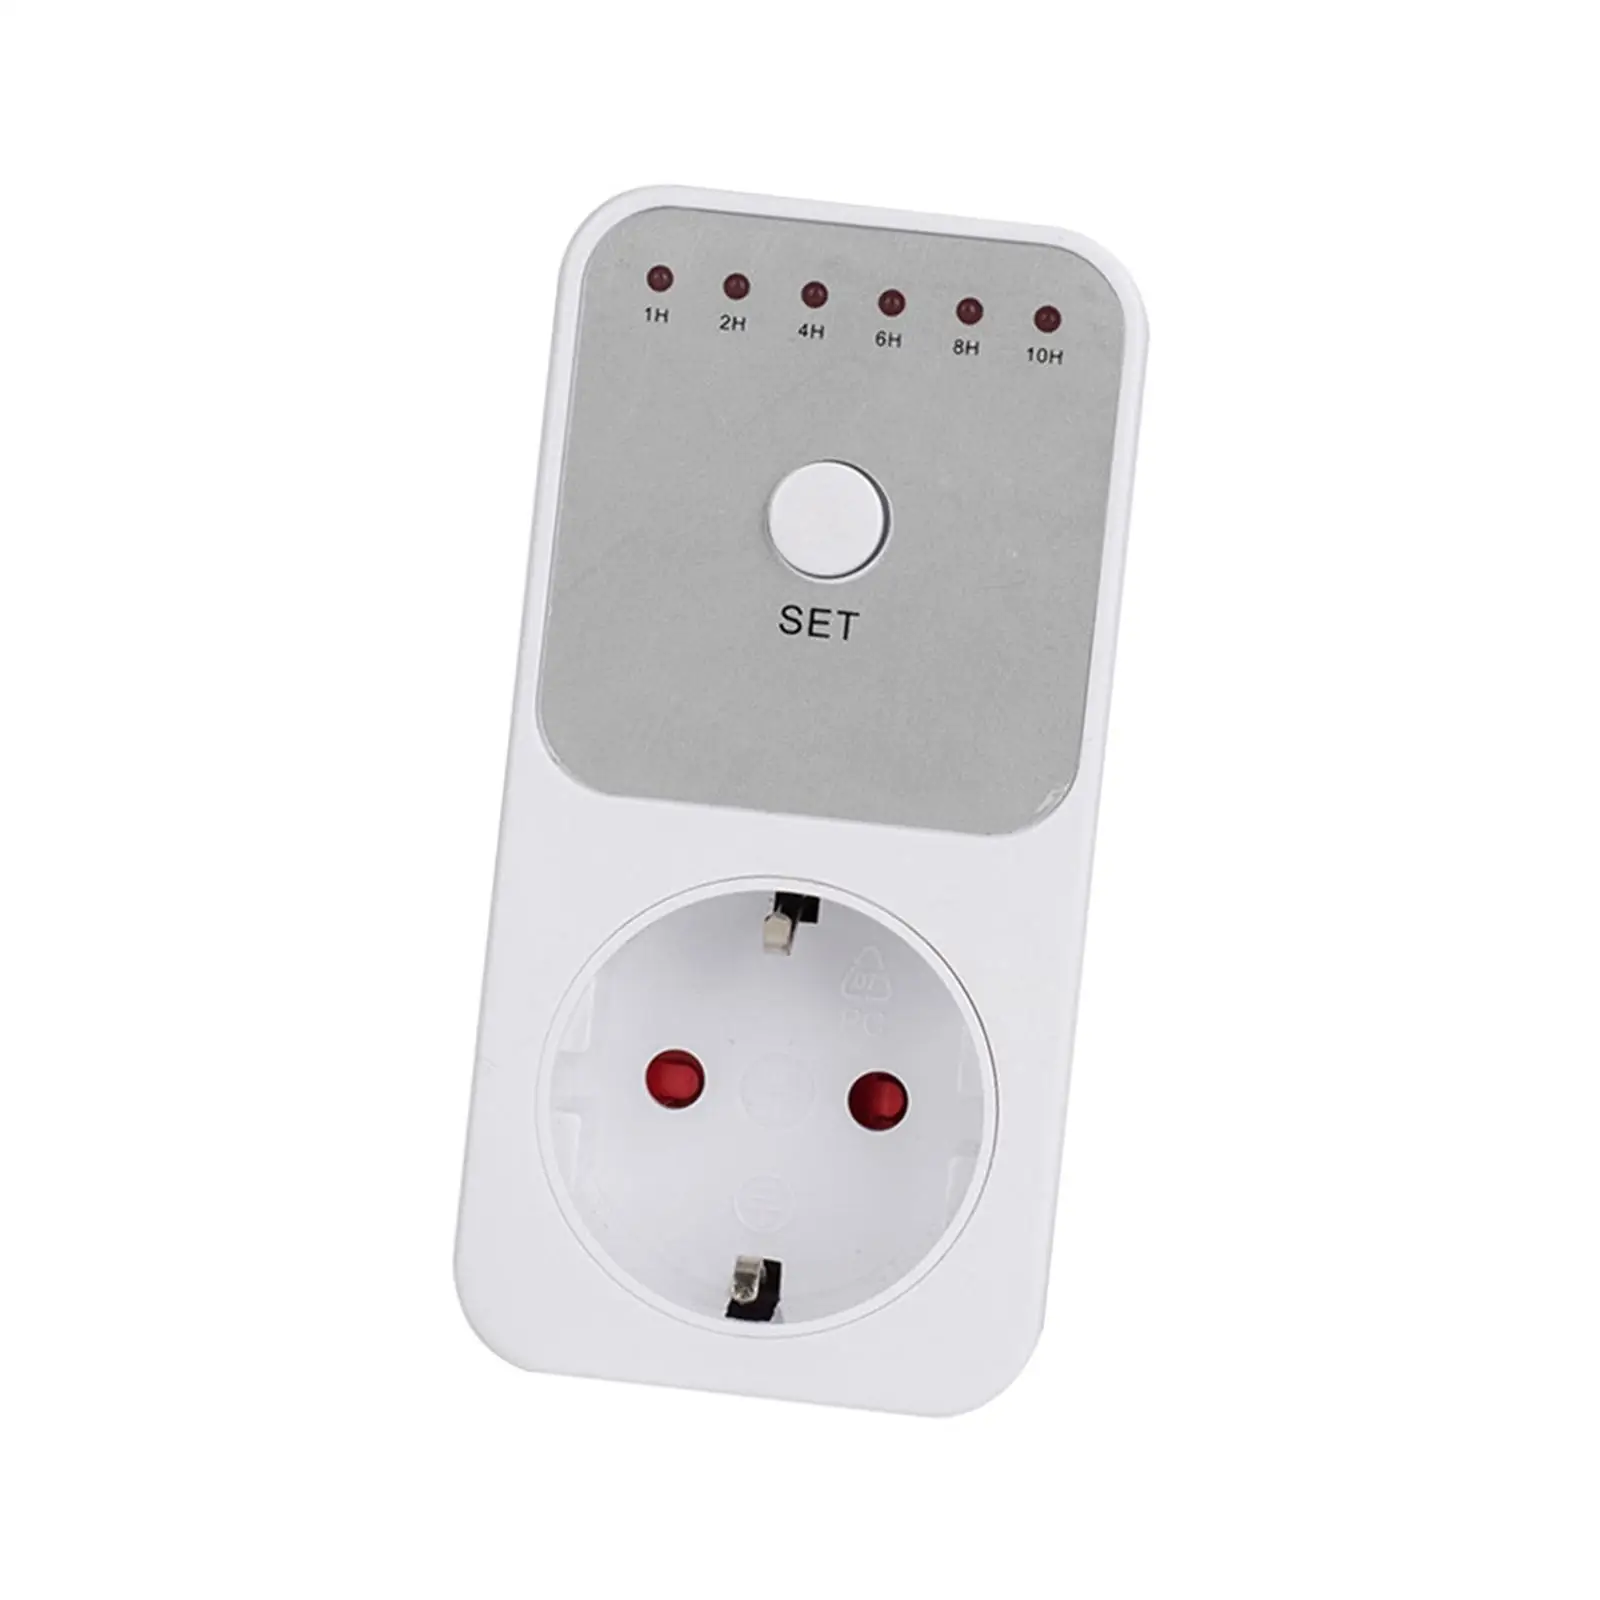 Timing Socket Cordless Wall Plug Energy Saving Time Switch Indoor Intelligent Socket Plug Auto Shut Off for Travel Lamps